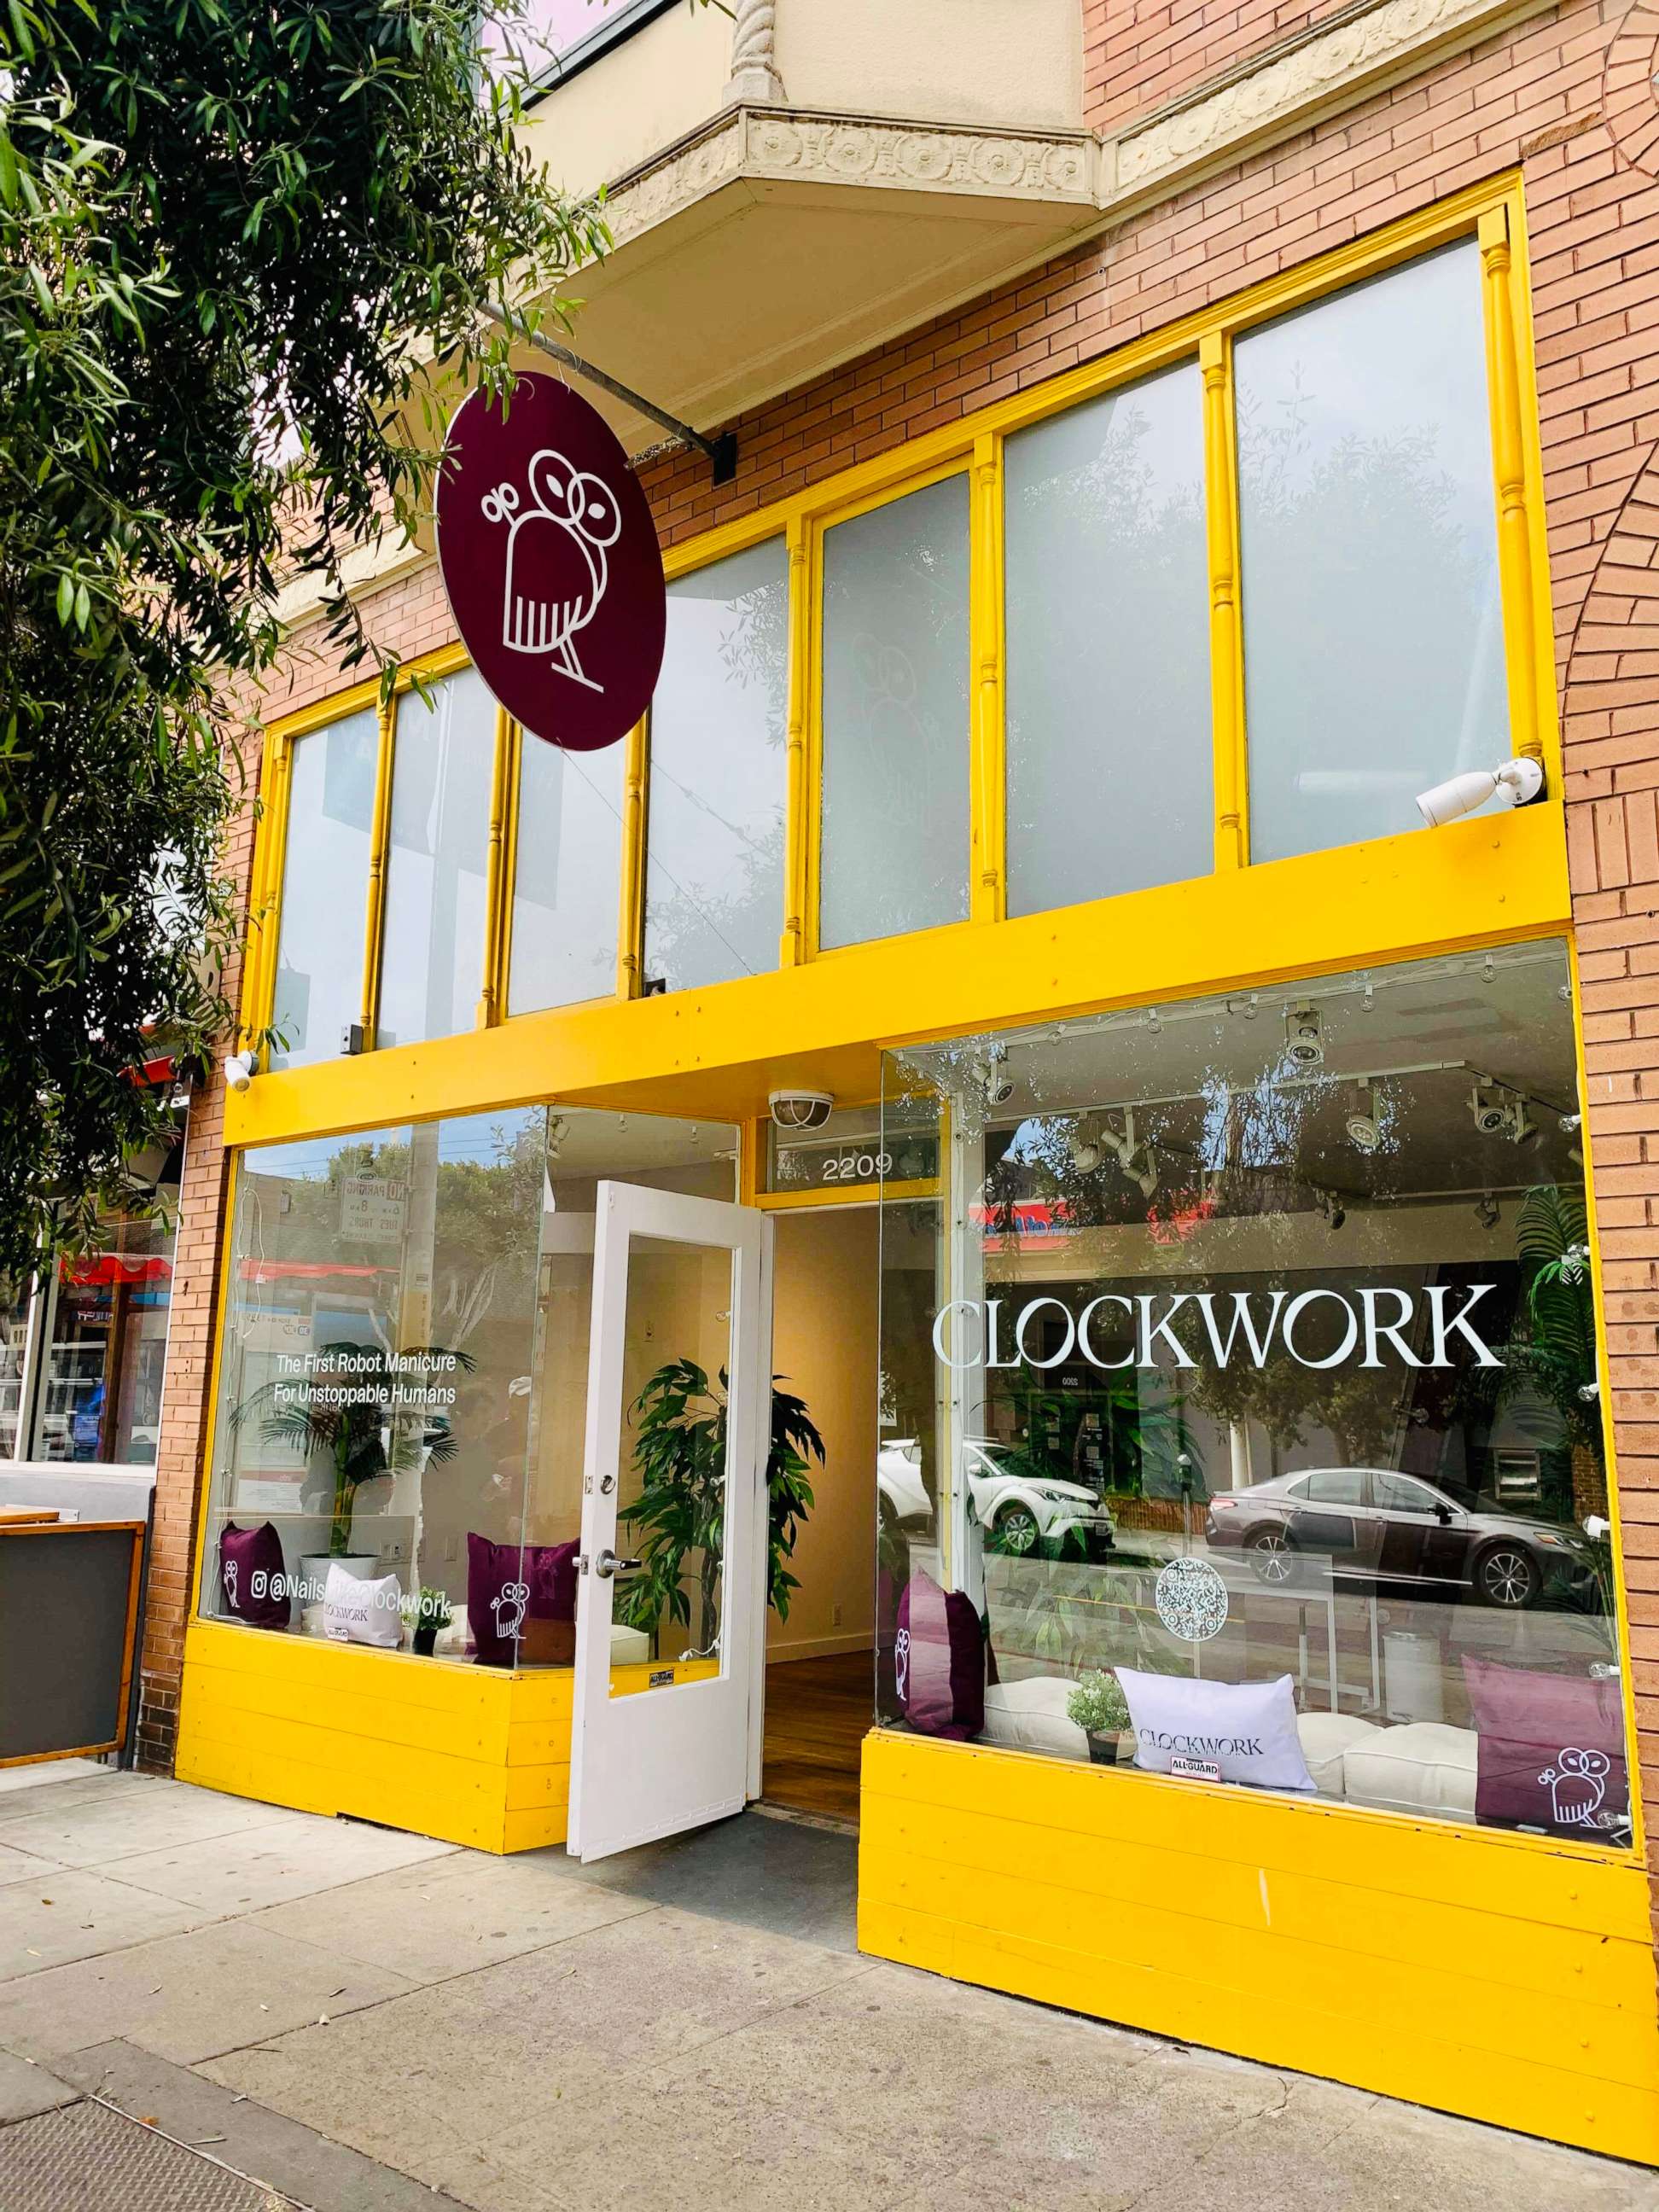 PHOTO: Outside of the Clockwork store in San Francisco.